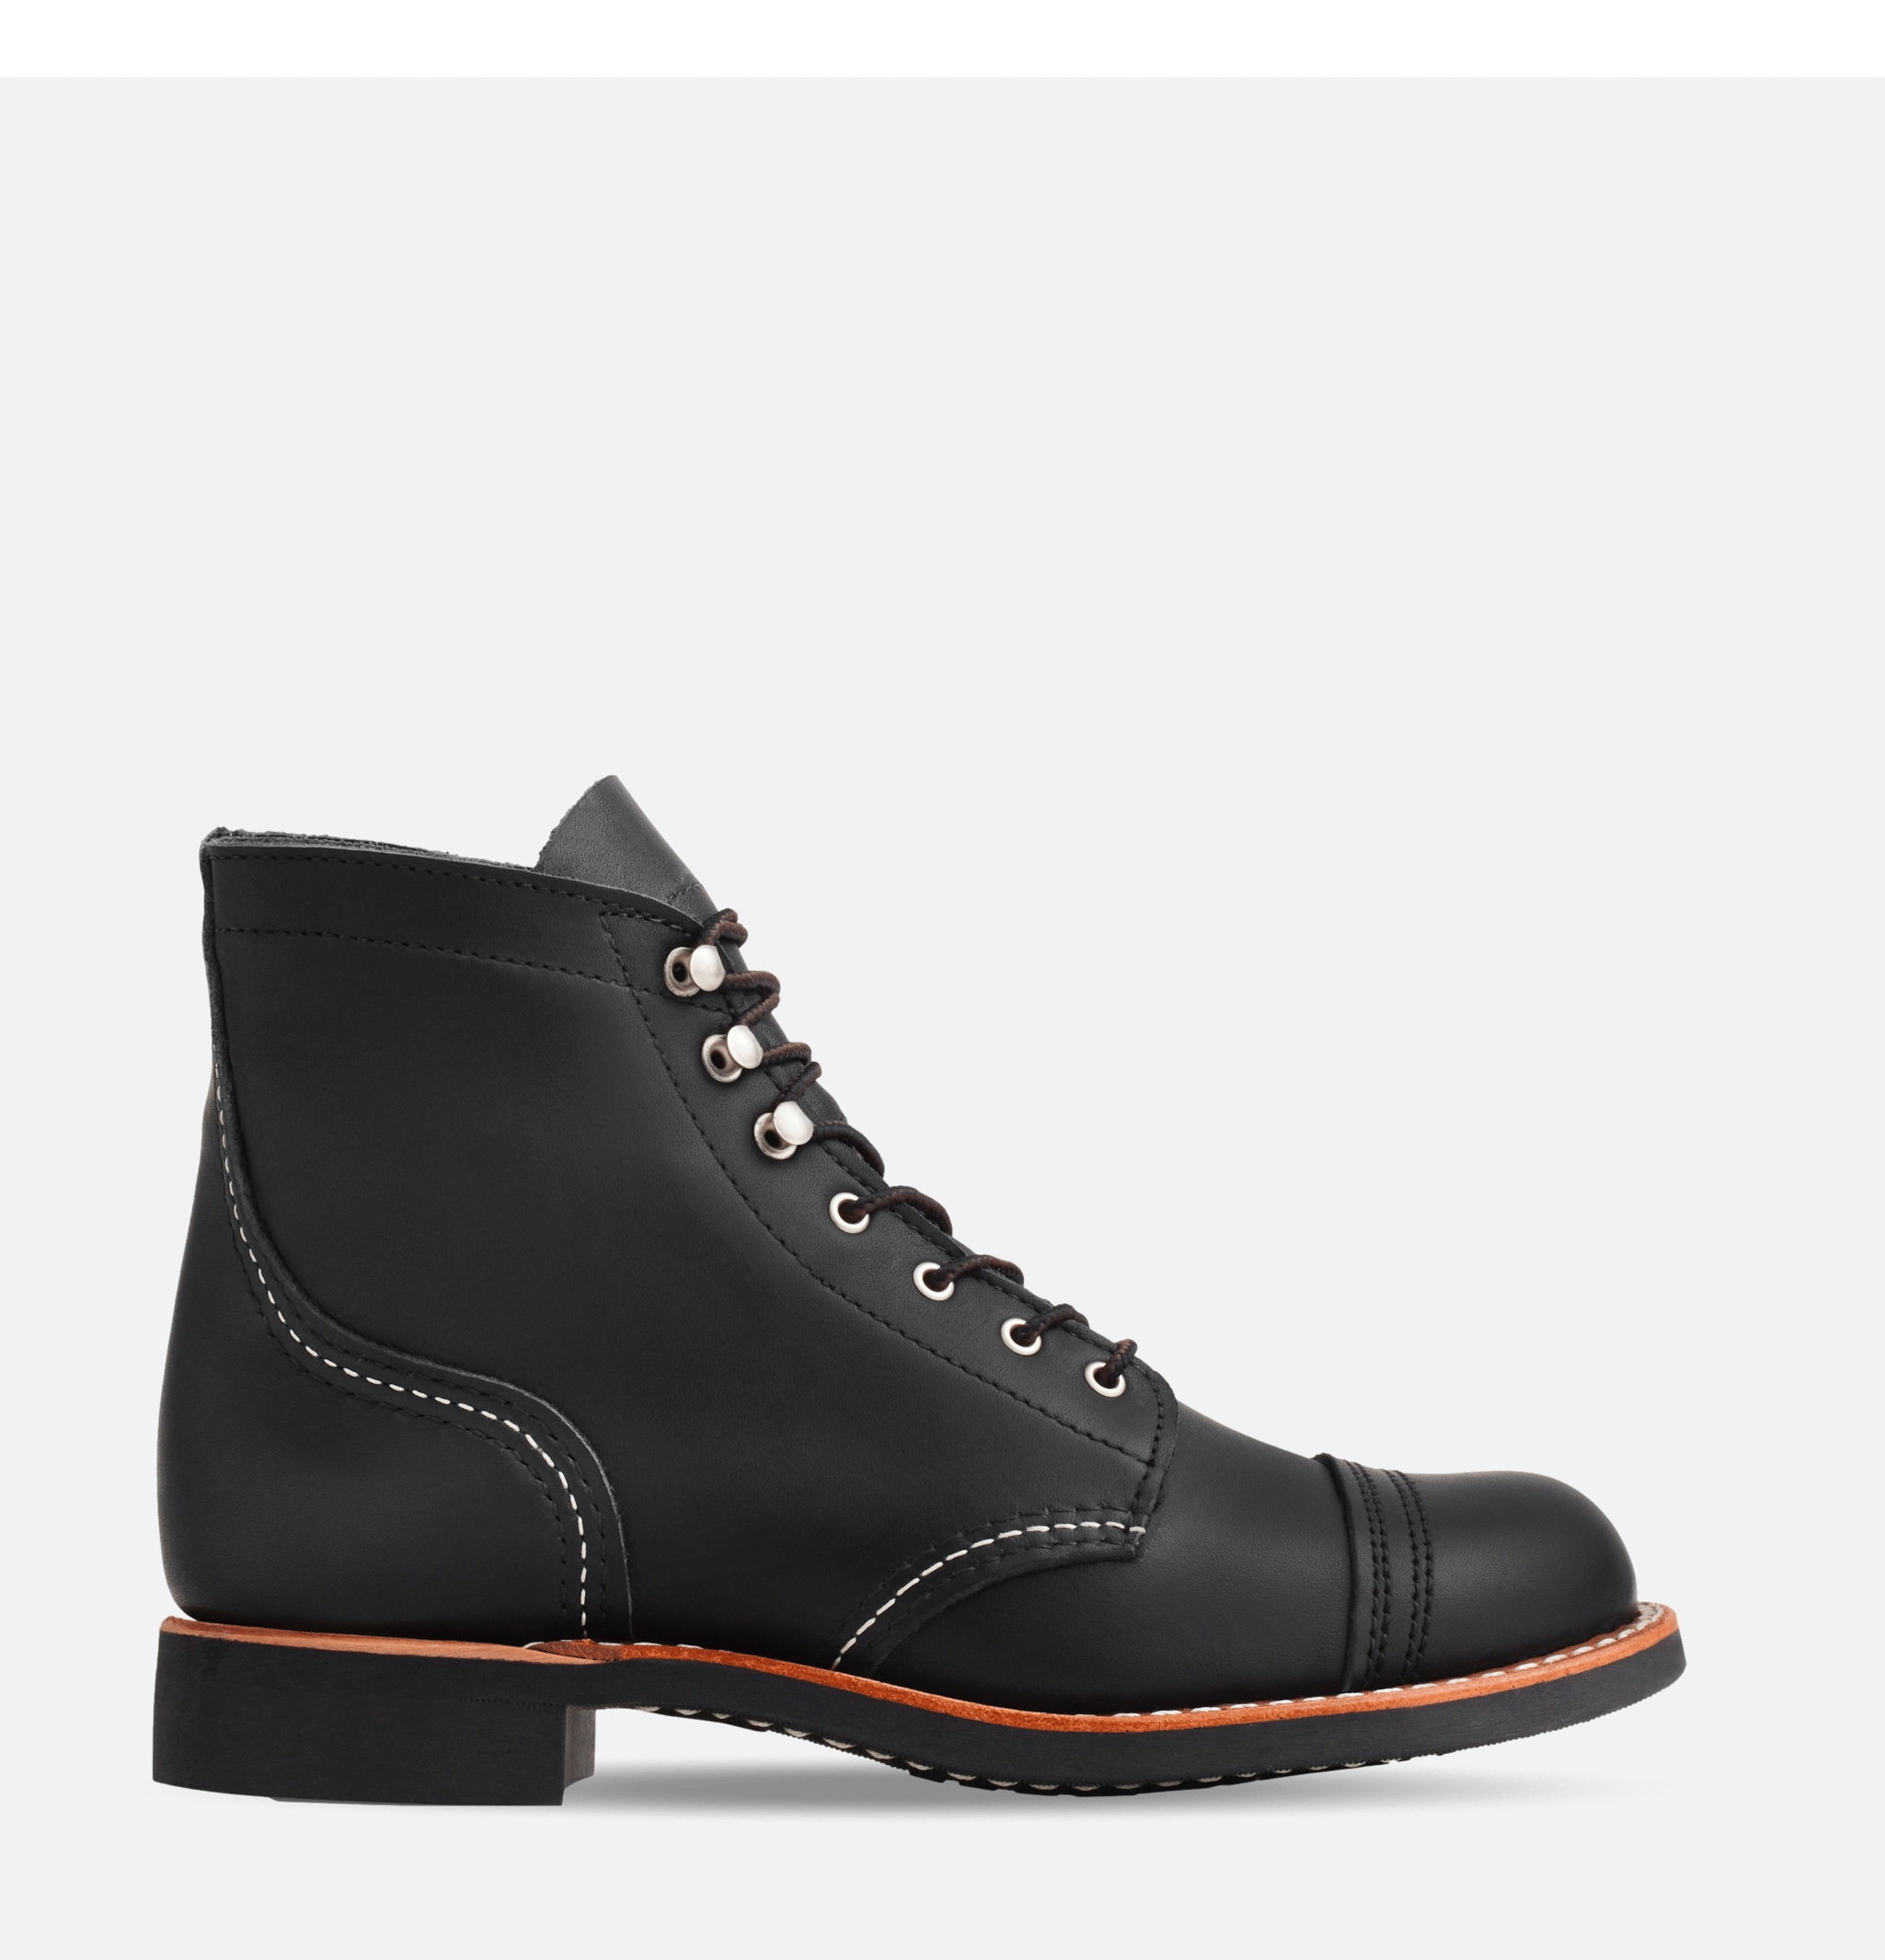 Red Wing Shoes Woman - 3366 - Iron Ranger Black